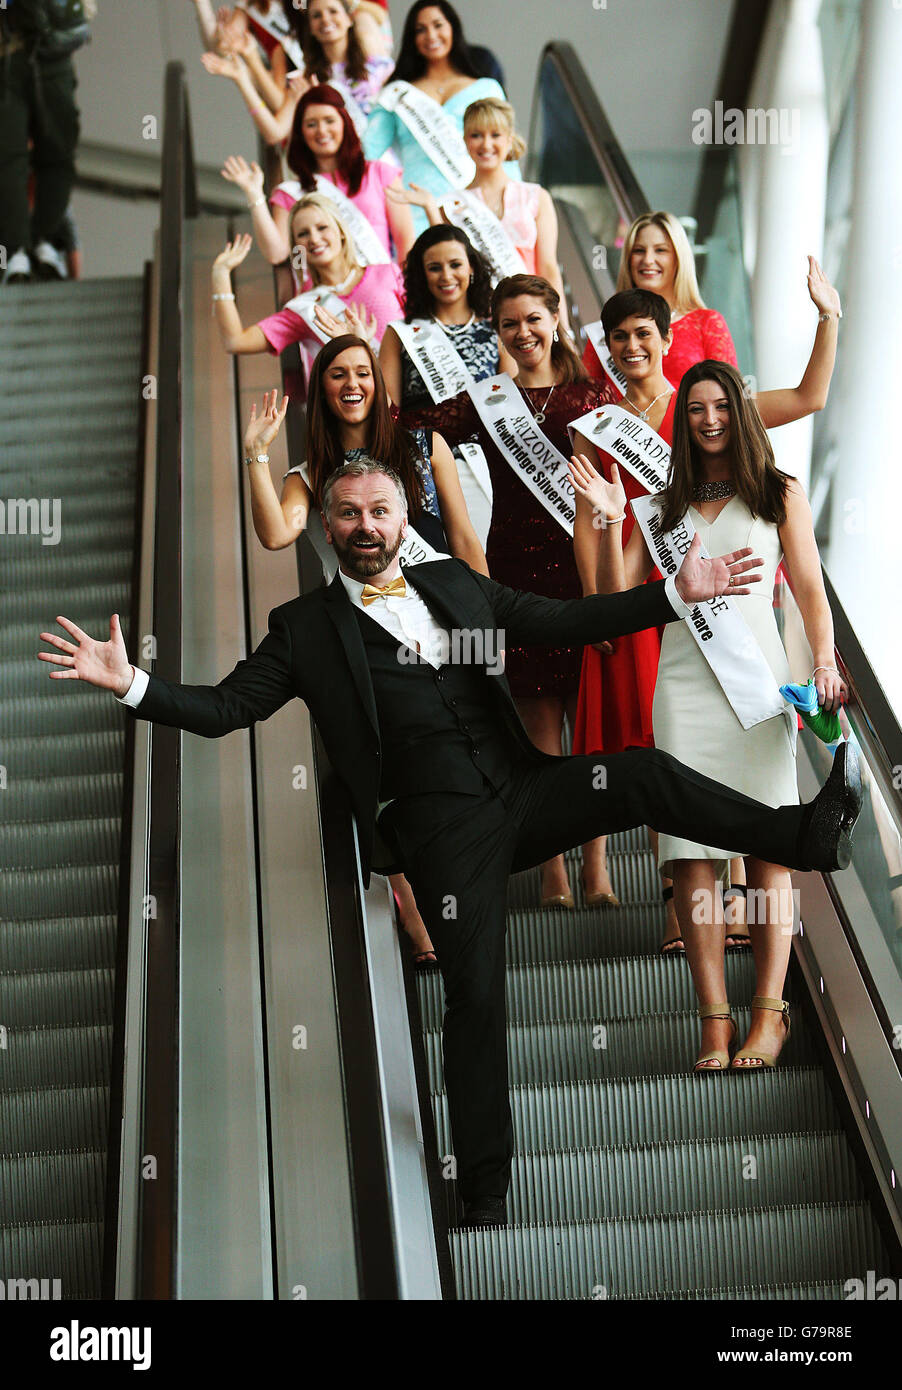 Host Daithi O Se with some of the 32 Irish and International Roses taking part in the 2014 International Rose Selection at the launch of this years Rose of Tralee Festival at Dublin Airport. Stock Photo